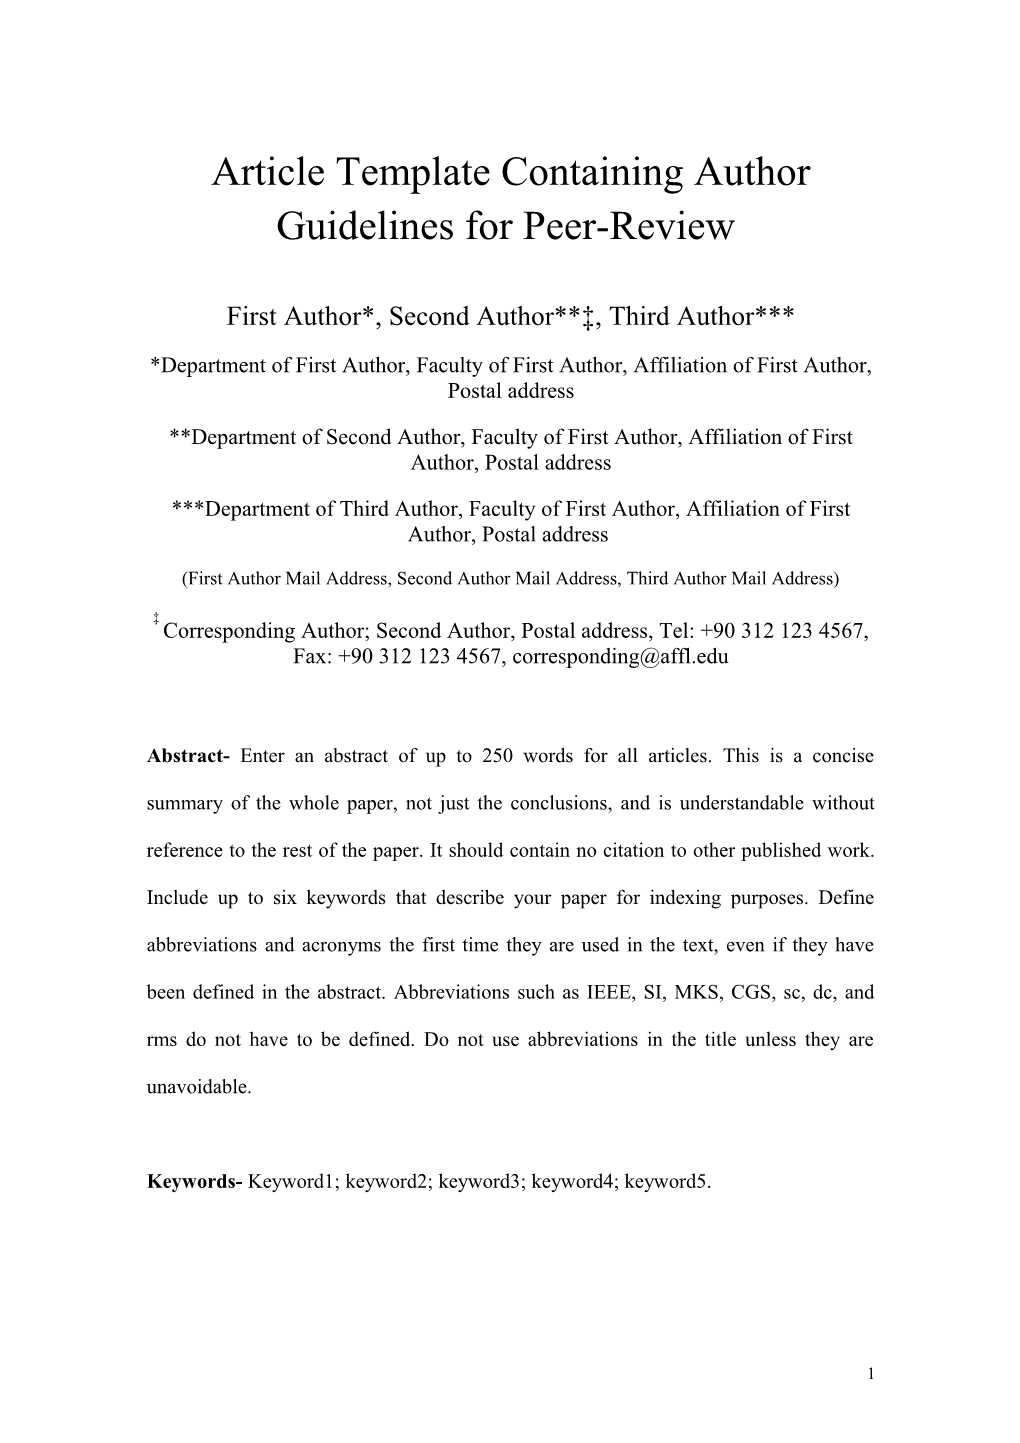 Article Template Containing Author Guidelines for Peer-Review